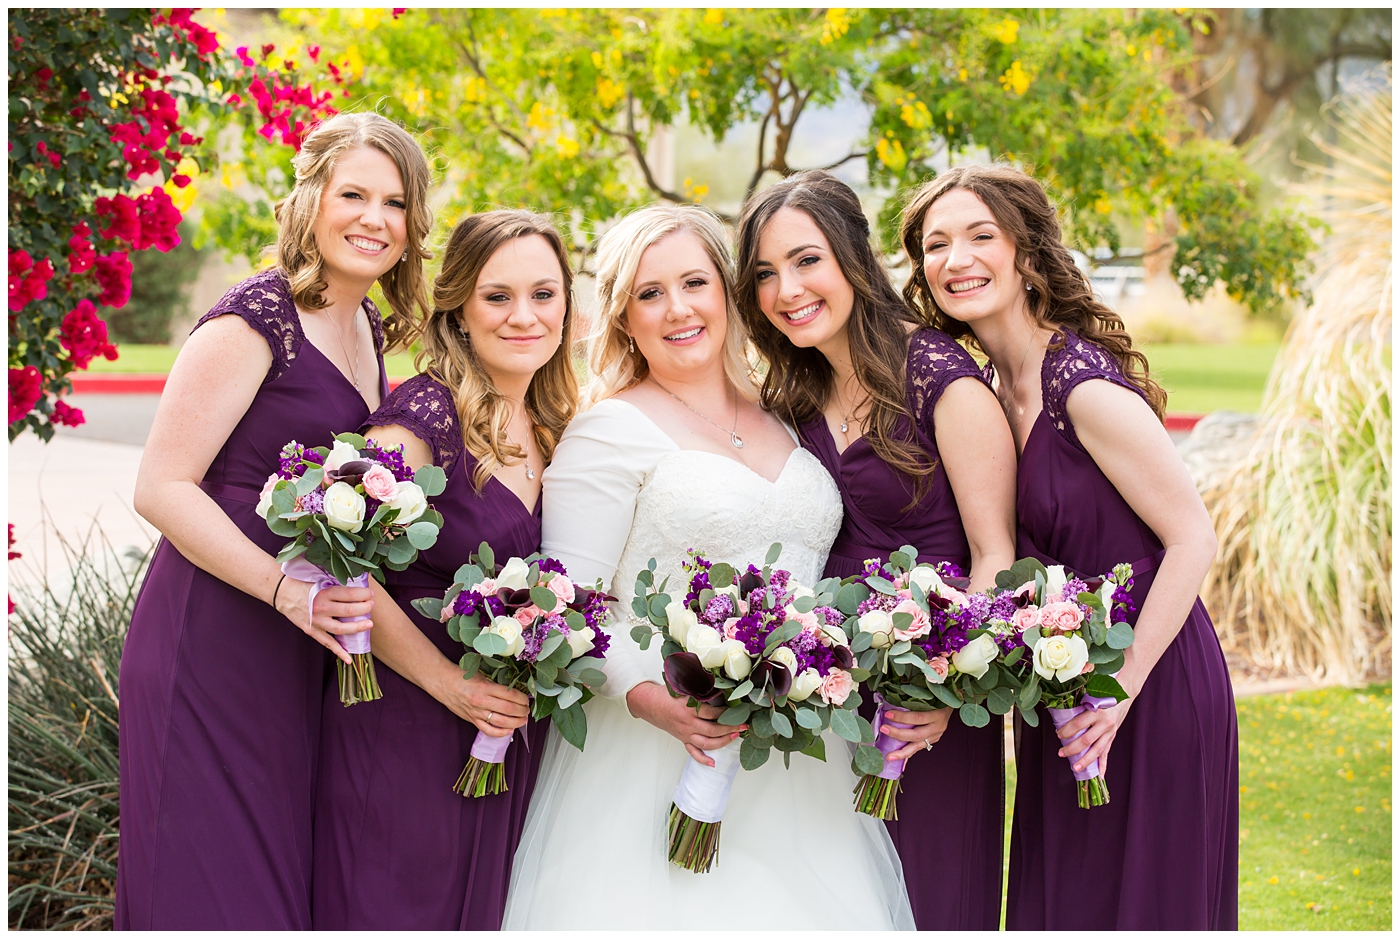 blonde bride in long sleeve wedding dress with purple and white flower bouquet with bridesmaids in plum dresses on wedding day bridal party portrait